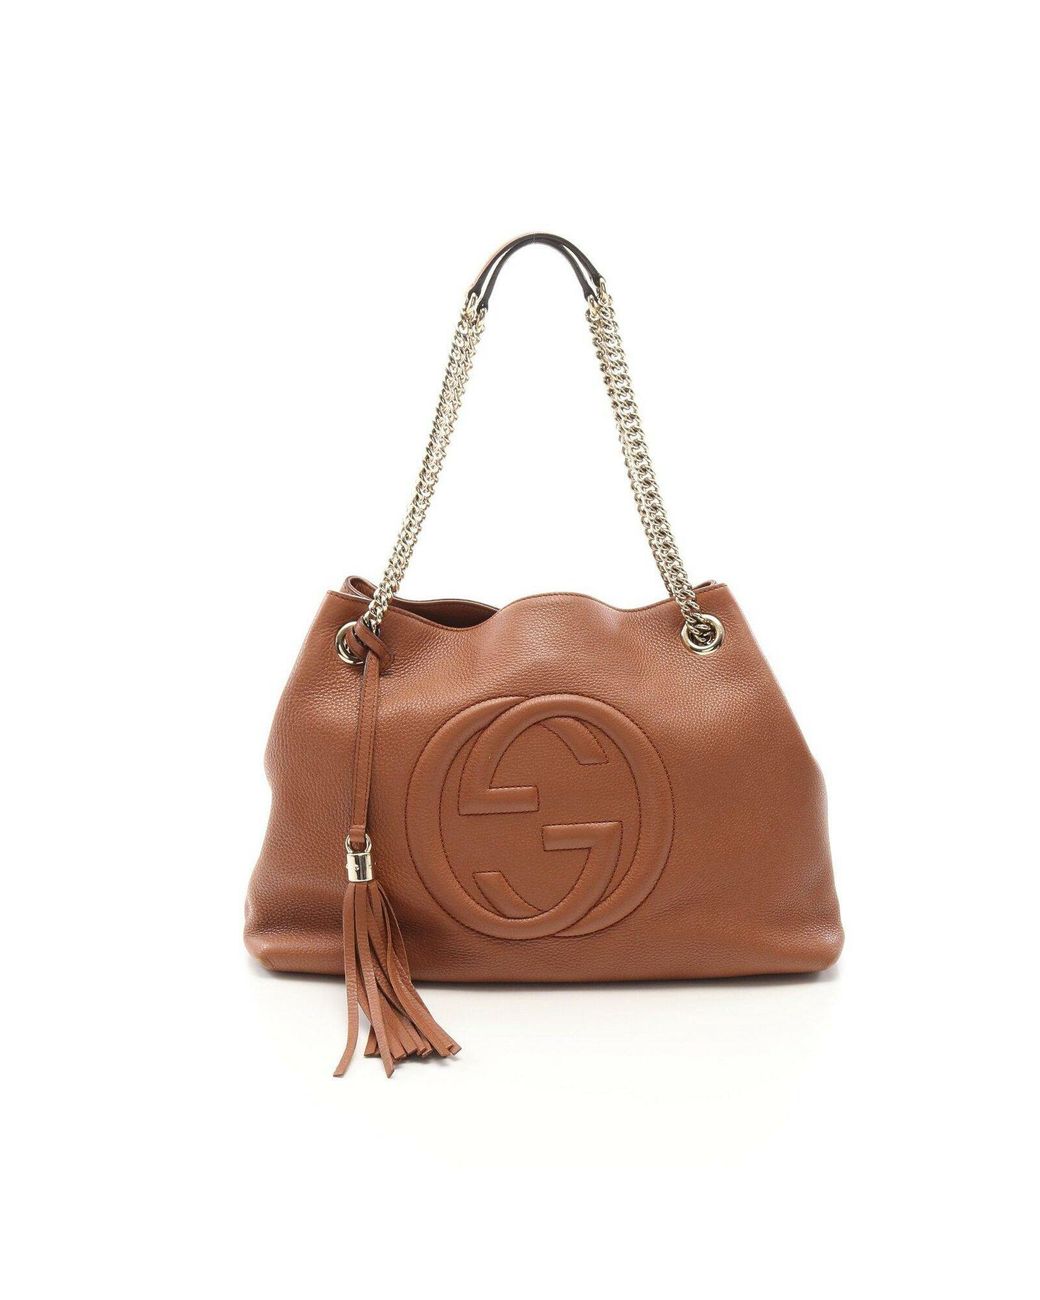 Gucci Leather Handbag in Brown | Lyst